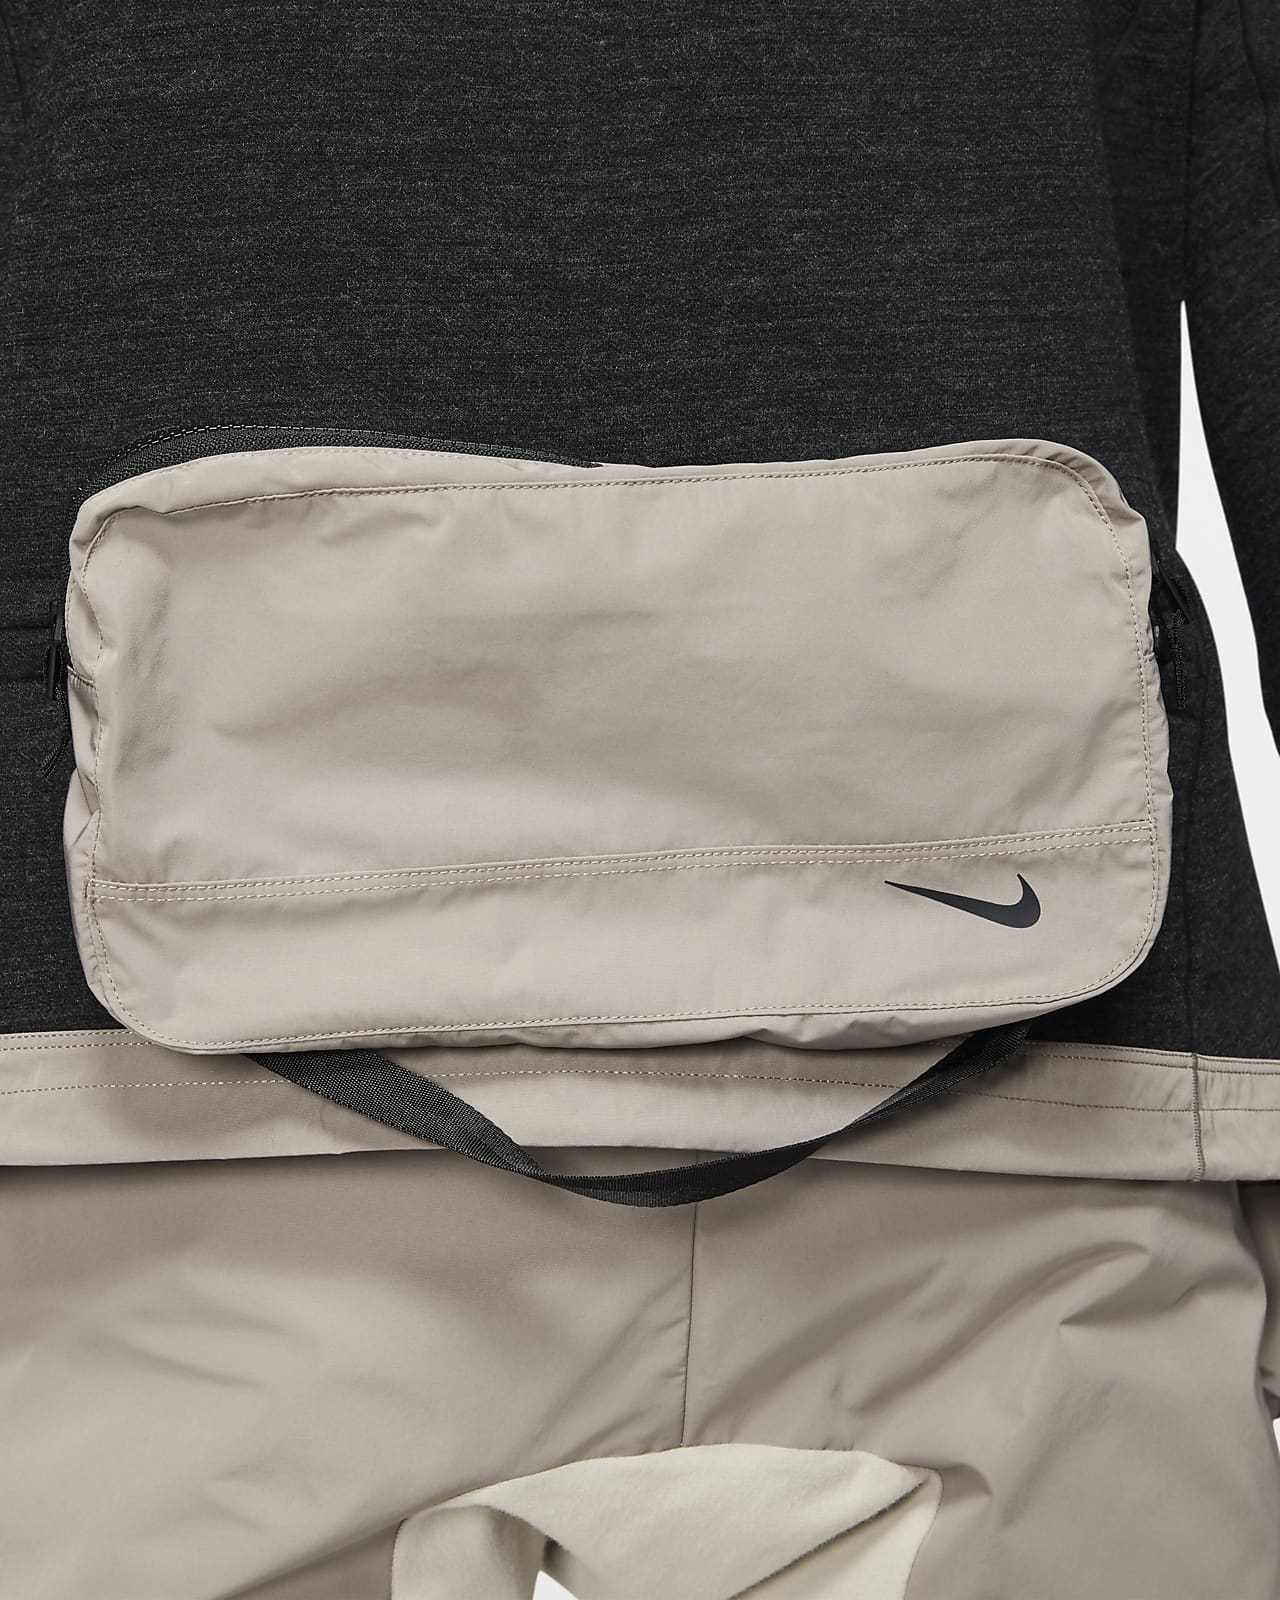 nike jacket that turns into a bag